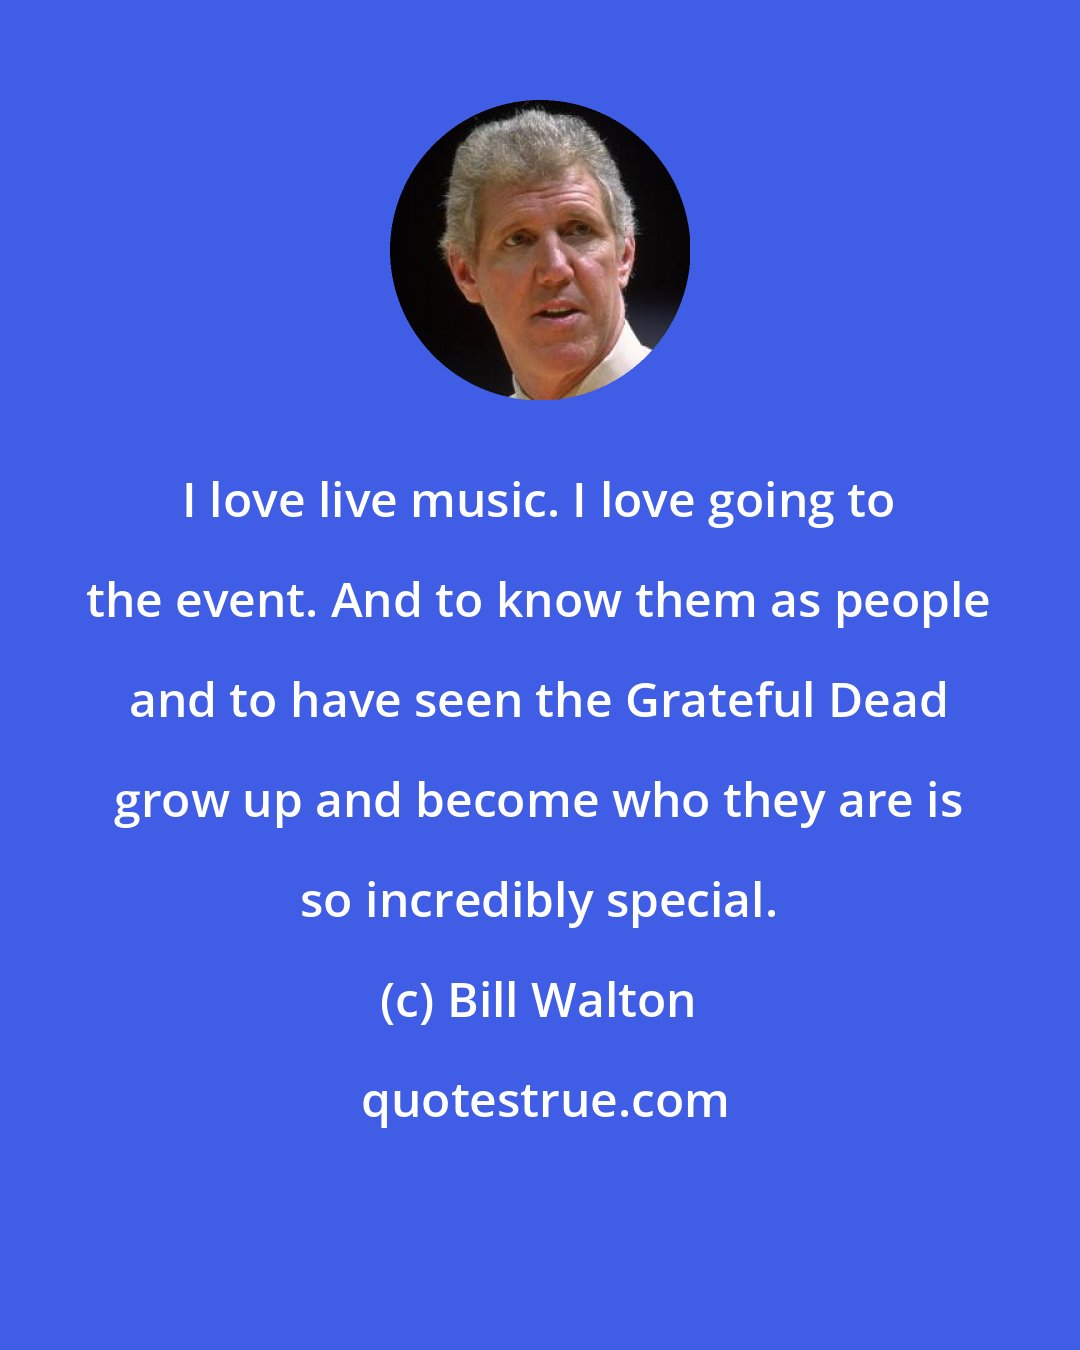 Bill Walton: I love live music. I love going to the event. And to know them as people and to have seen the Grateful Dead grow up and become who they are is so incredibly special.